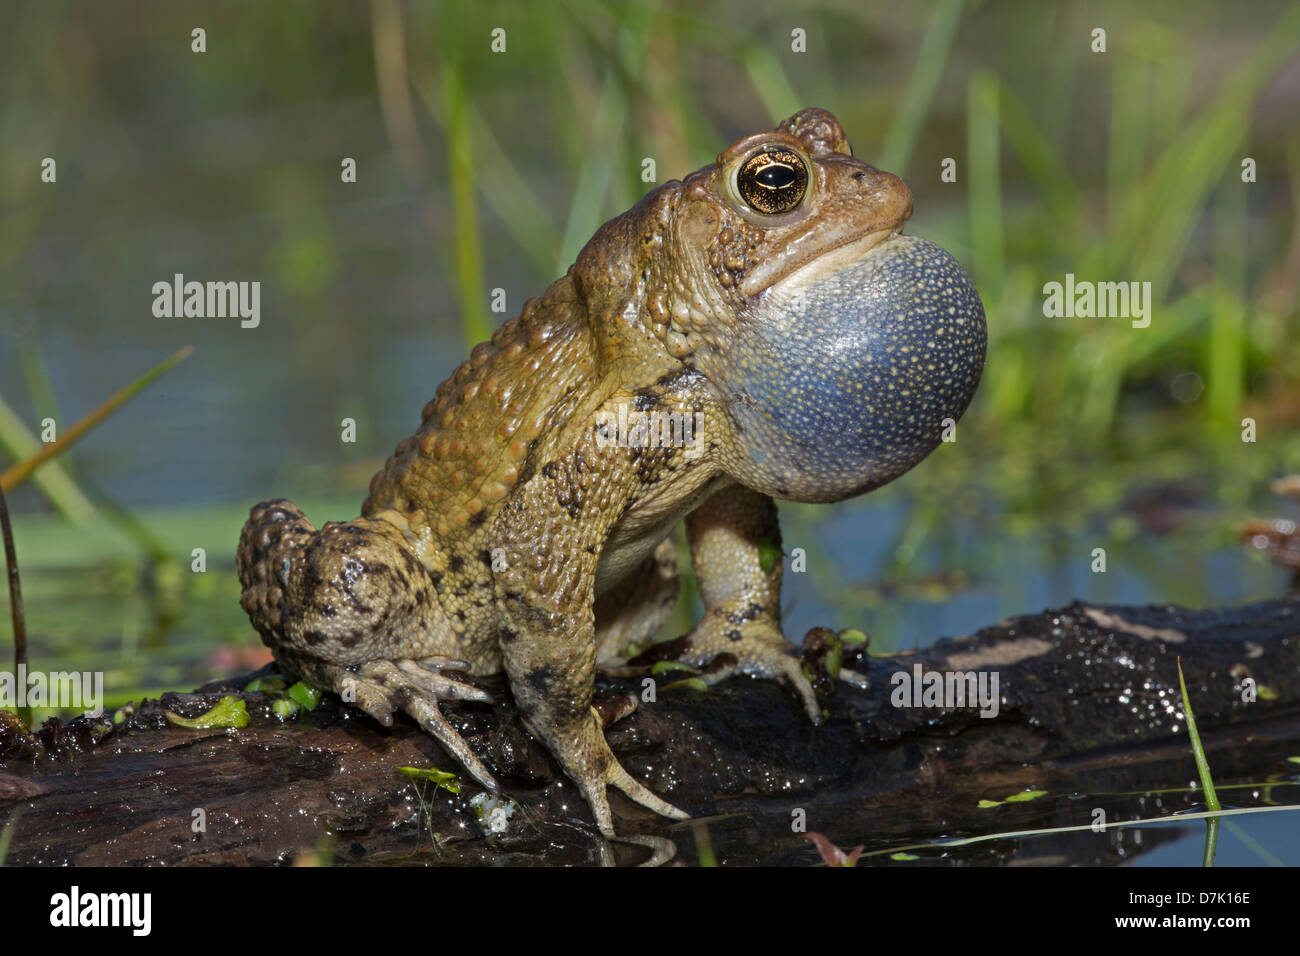 American toad - Bufo americanus - New York - Male calling to attract females Stock Photo